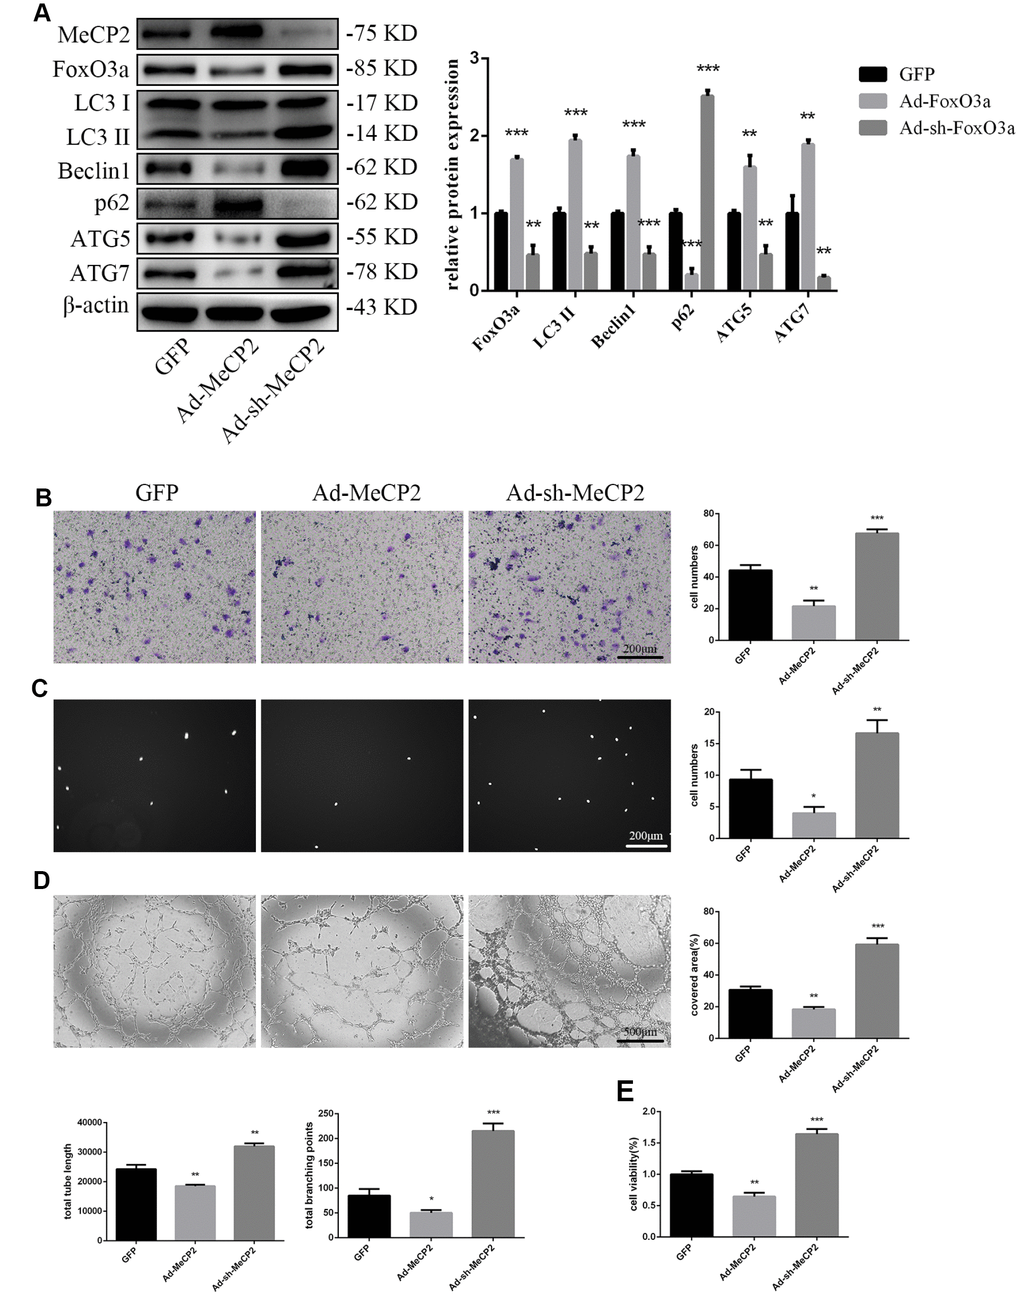 MeCP2 inhibited FoxO3a, autophagy, and cellular function. (A) Protein levels of FoxO3a, LC3 II, Beclin1, p62, ATG5, and ATG7 were detected by western blotting after transfection with Ad-MeCP2 or Ad-sh-MeCP2 for 48 h. (B) Cell migration was evaluated by Transwell migration assays after transfection with Ad-MeCP2 or Ad-sh-MeCP2 for 48 h. (C) Cell adhesion ability was evaluated by matrix adhesion assays after transfection with Ad-MeCP2 or Ad-sh-MeCP2 for 48 h. (D) Angiogenic ability was evaluated by Matrigel assays after transfection with Ad-MeCP2 or Ad-sh-MeCP2 for 48 h. (E) Cell viability was evaluated with CCK-8 after transfection with Ad-MeCP2 or Ad-sh-MeCP2 for 48 h. *P 